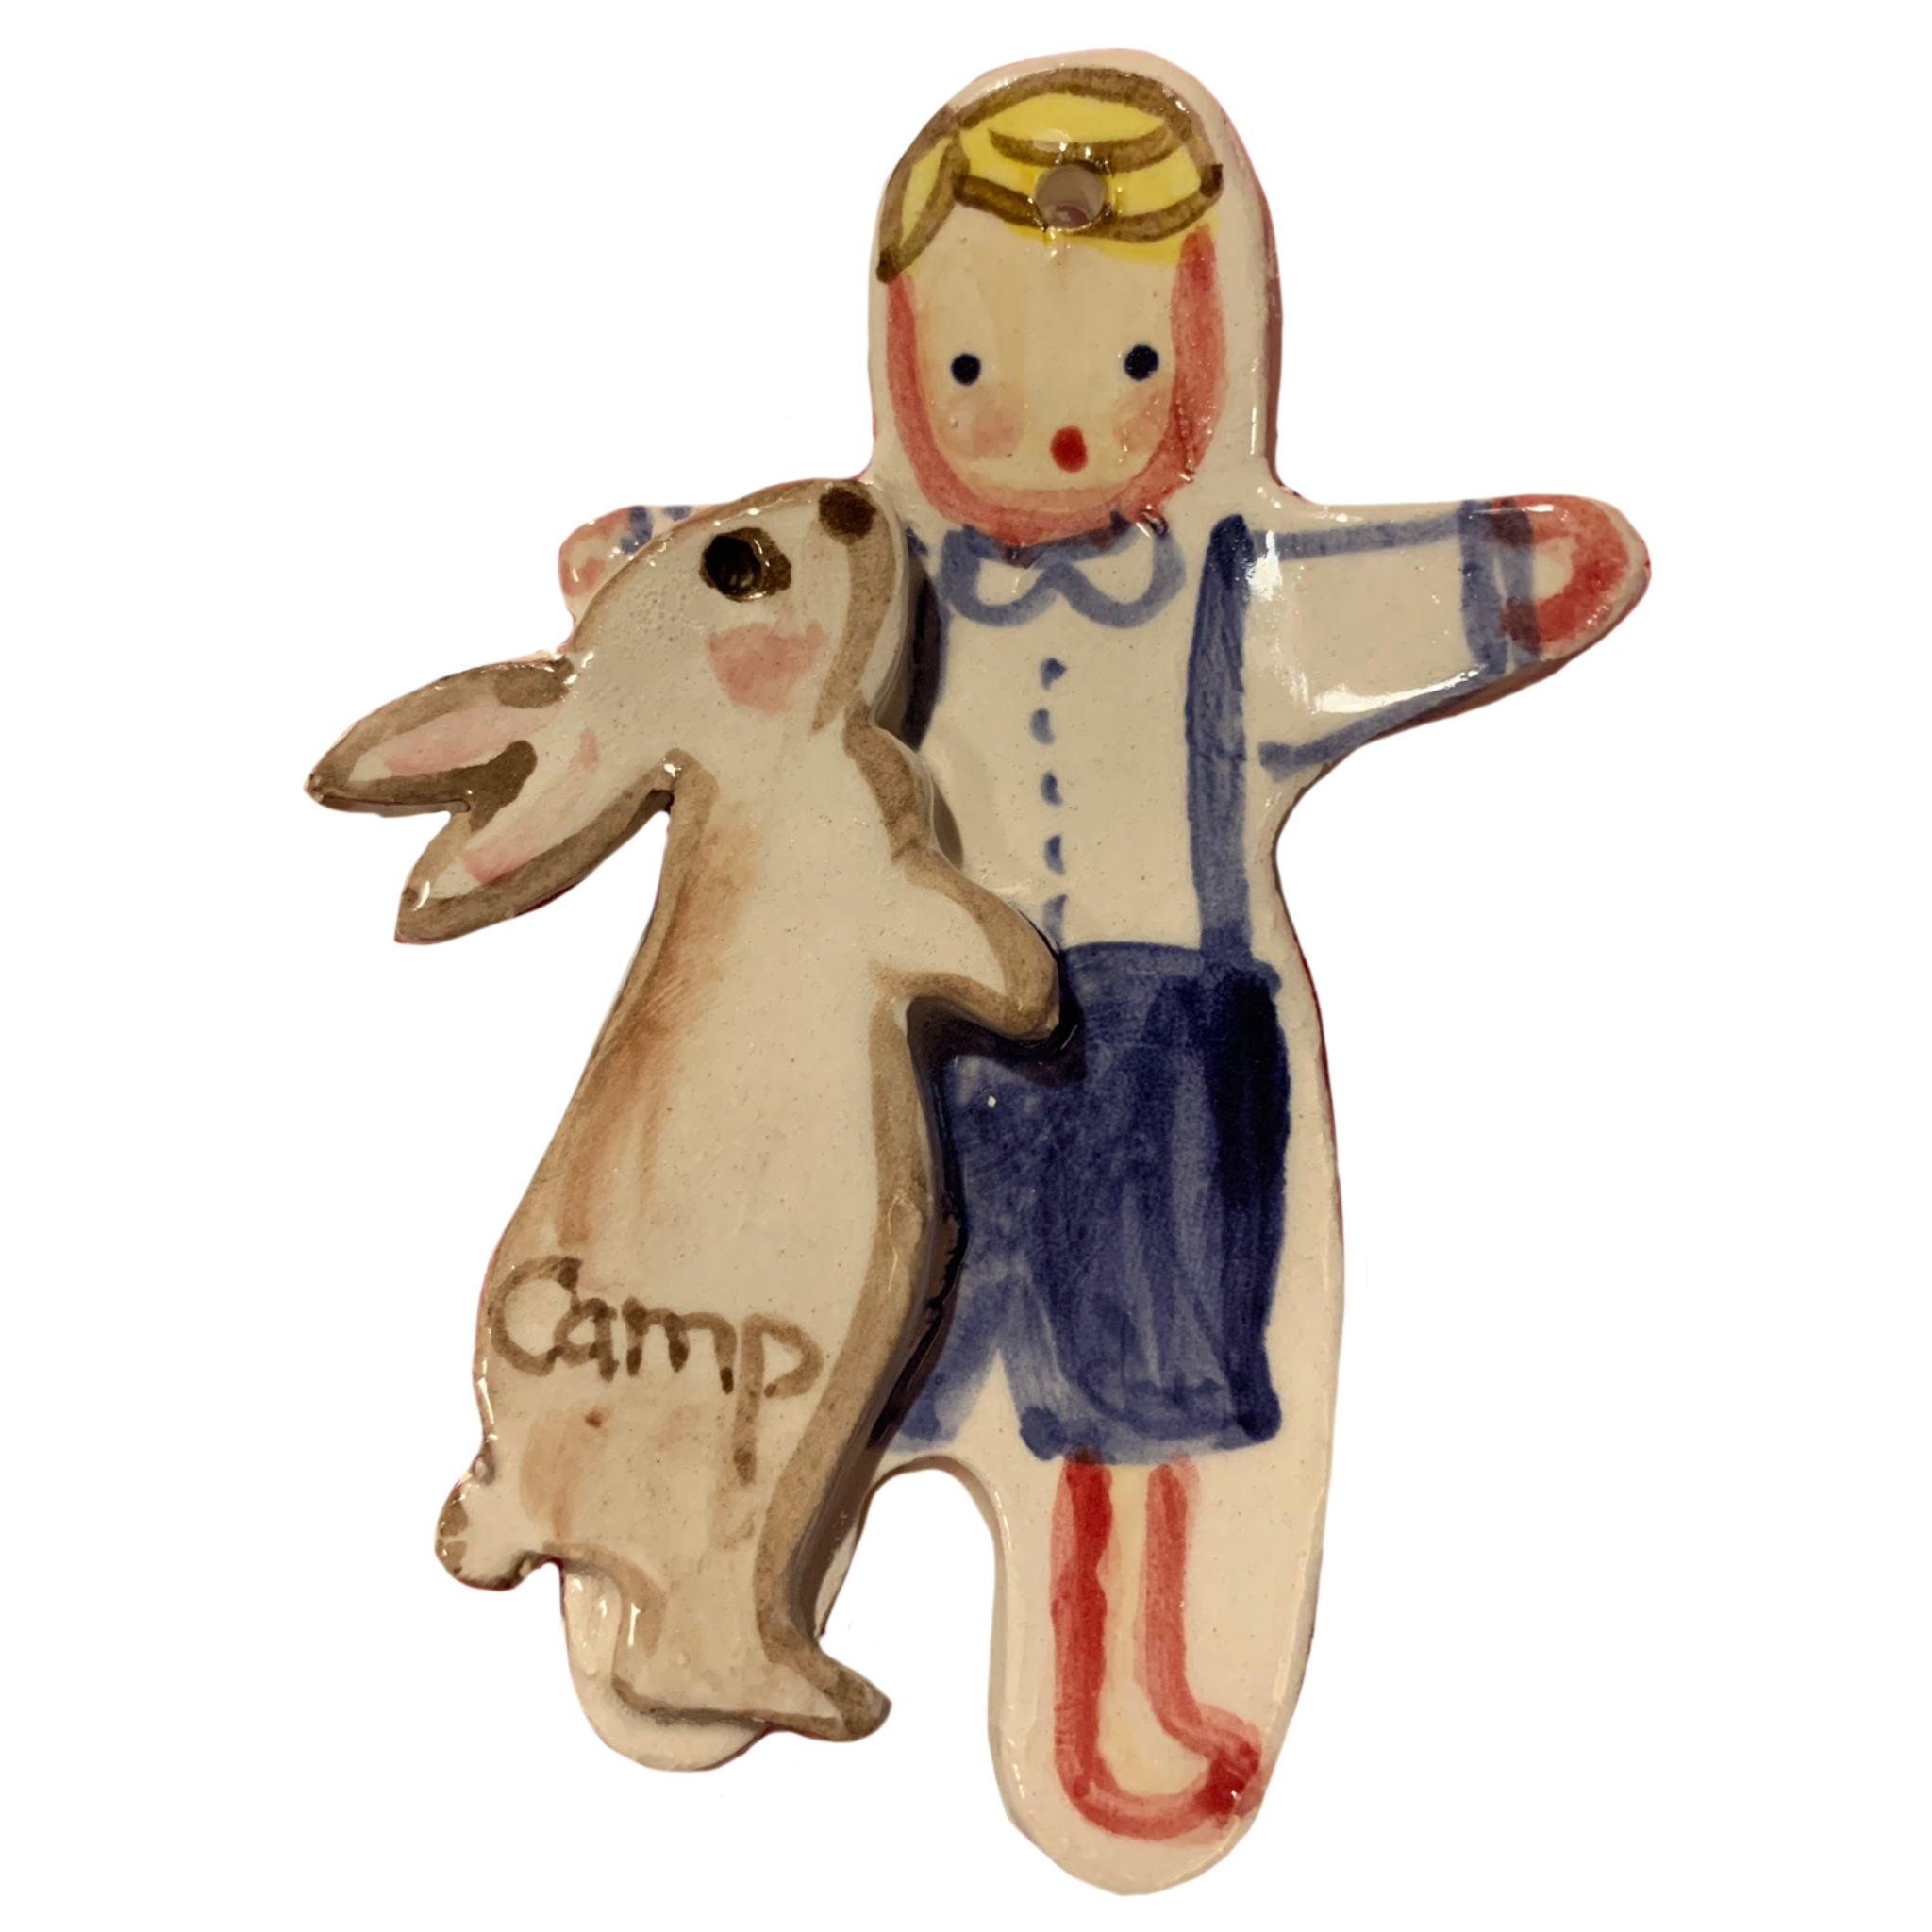 Boy with Bunny ornament - Tricia Lowenfield Design